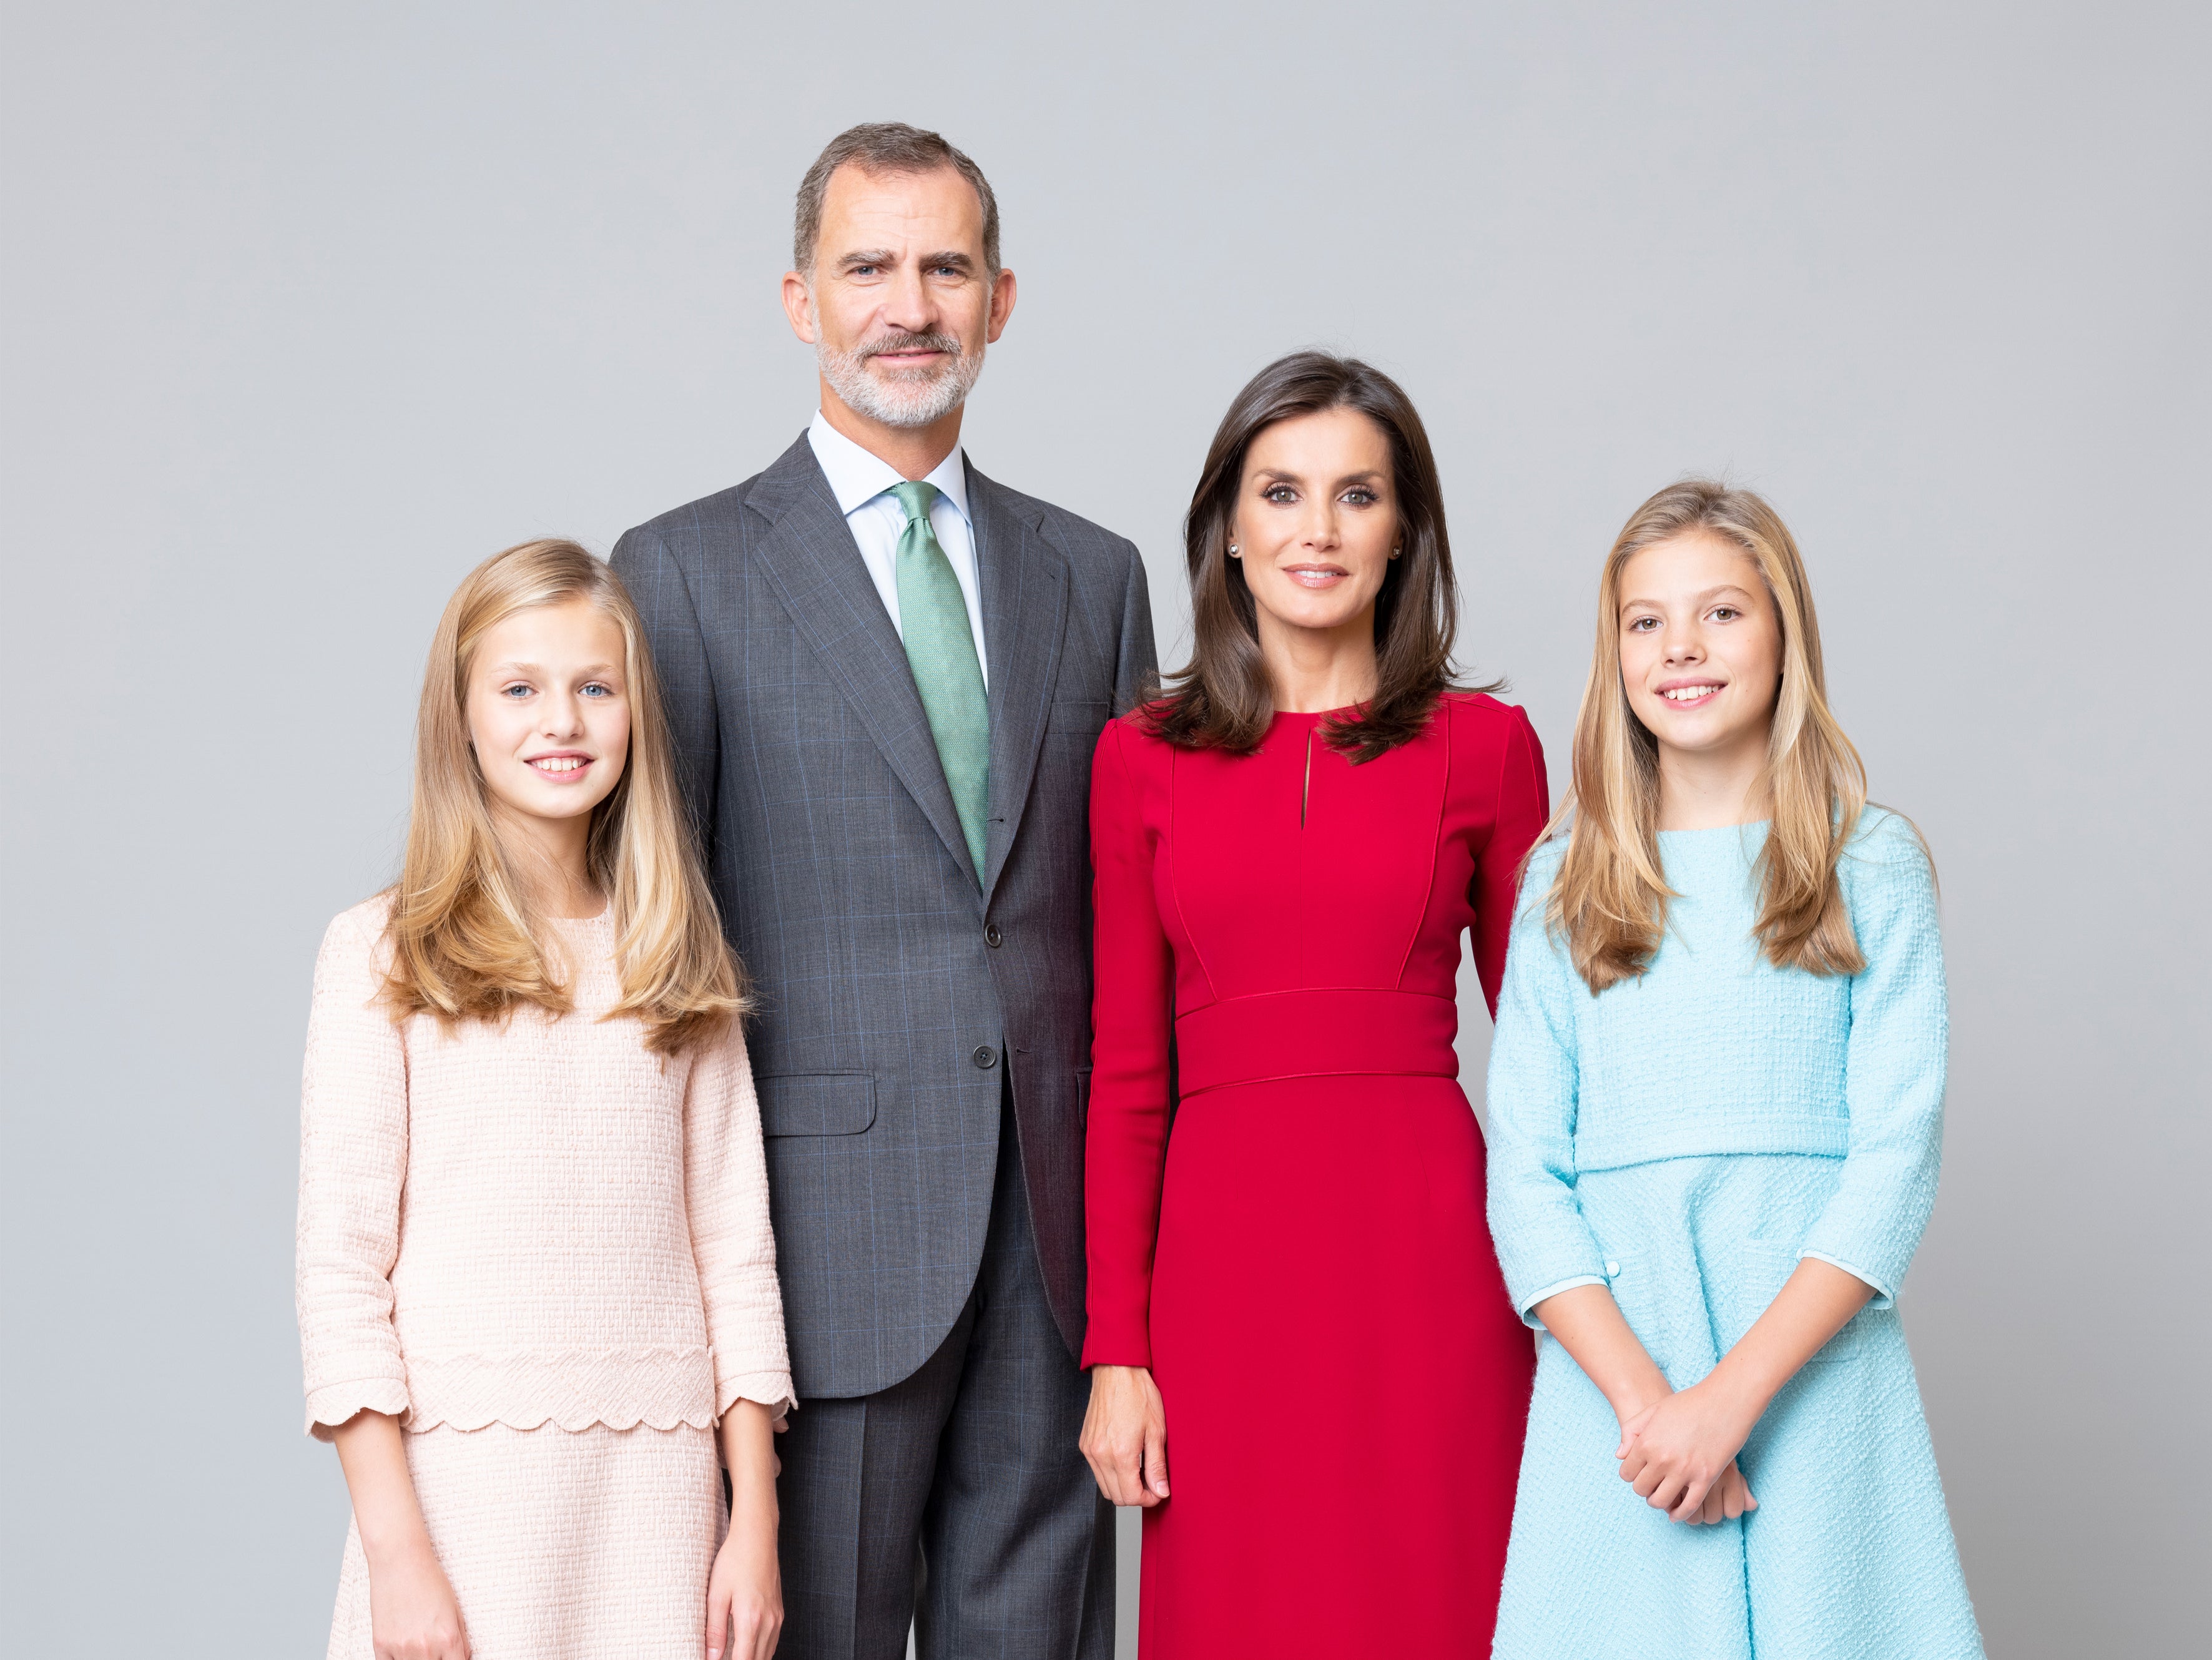 The royal couple are parents to two daughters: Leonor, Princess of Asturias and Infanta Sofía